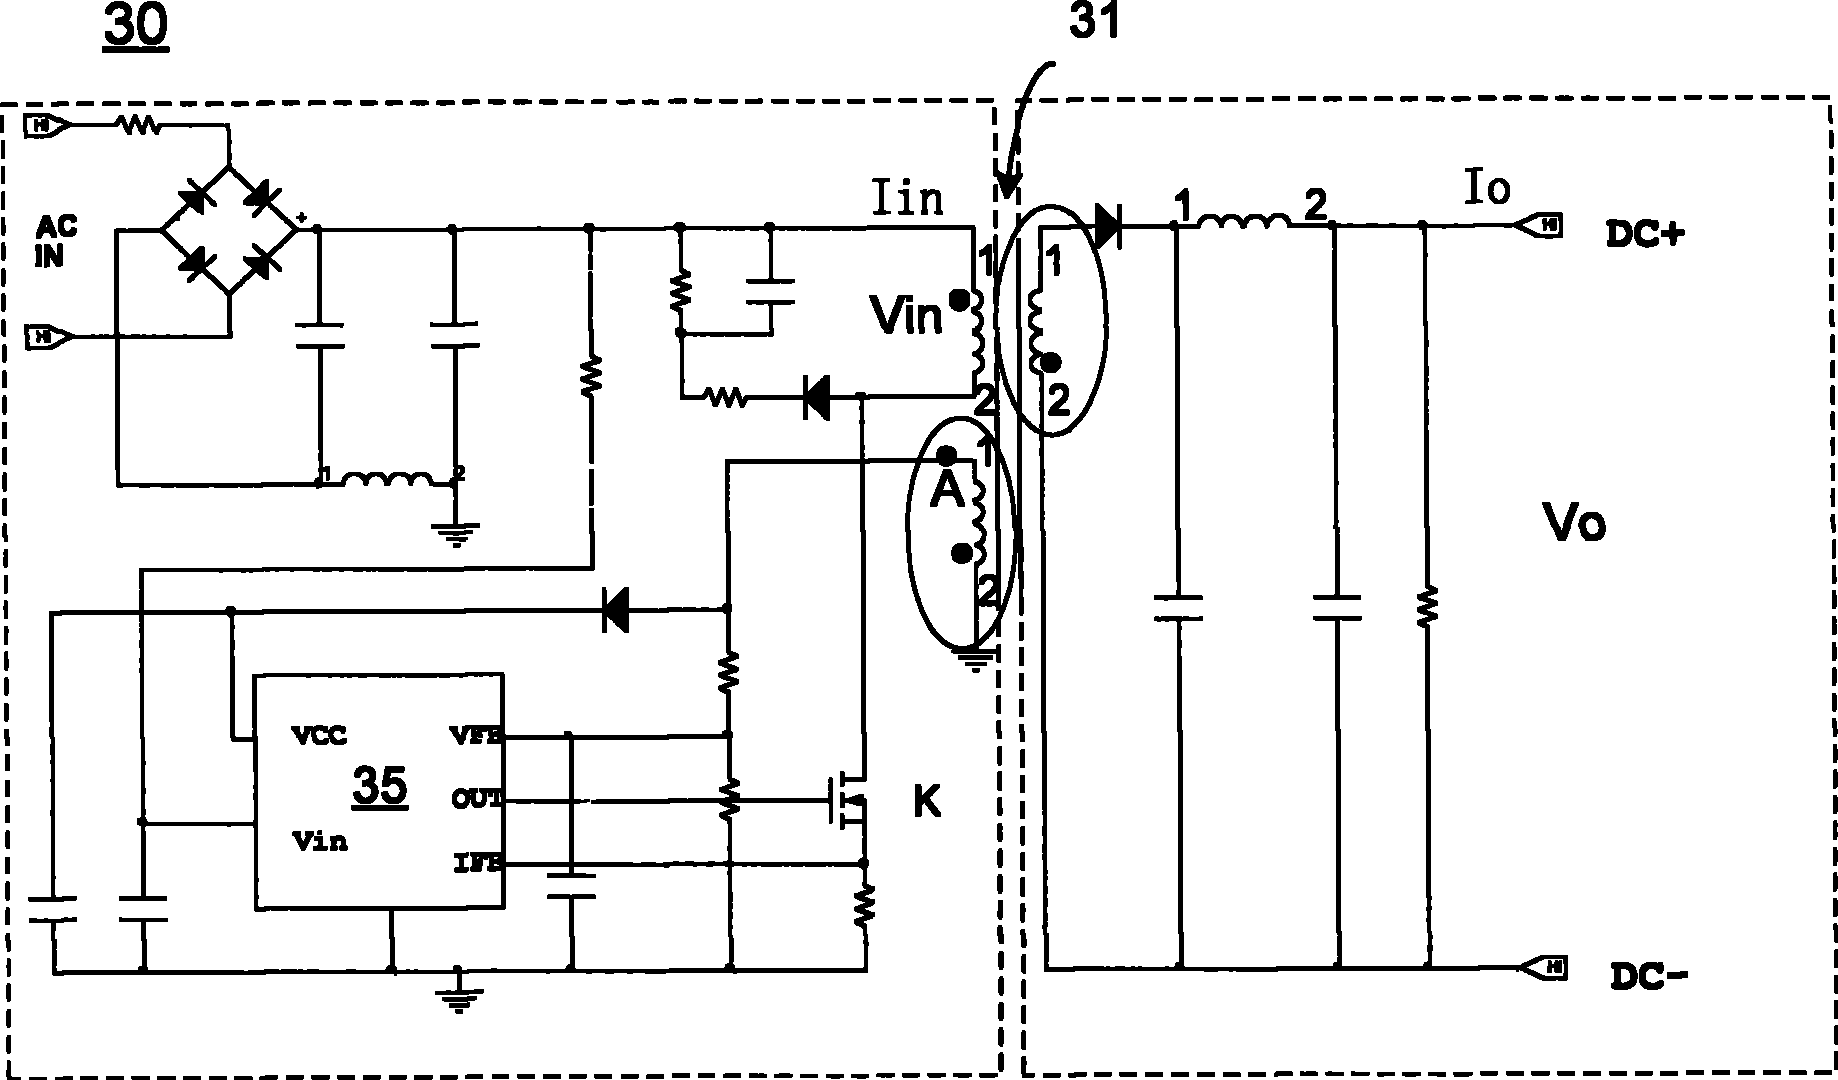 Output power supervisory circuit and control circuit for AC/DC converting circuit